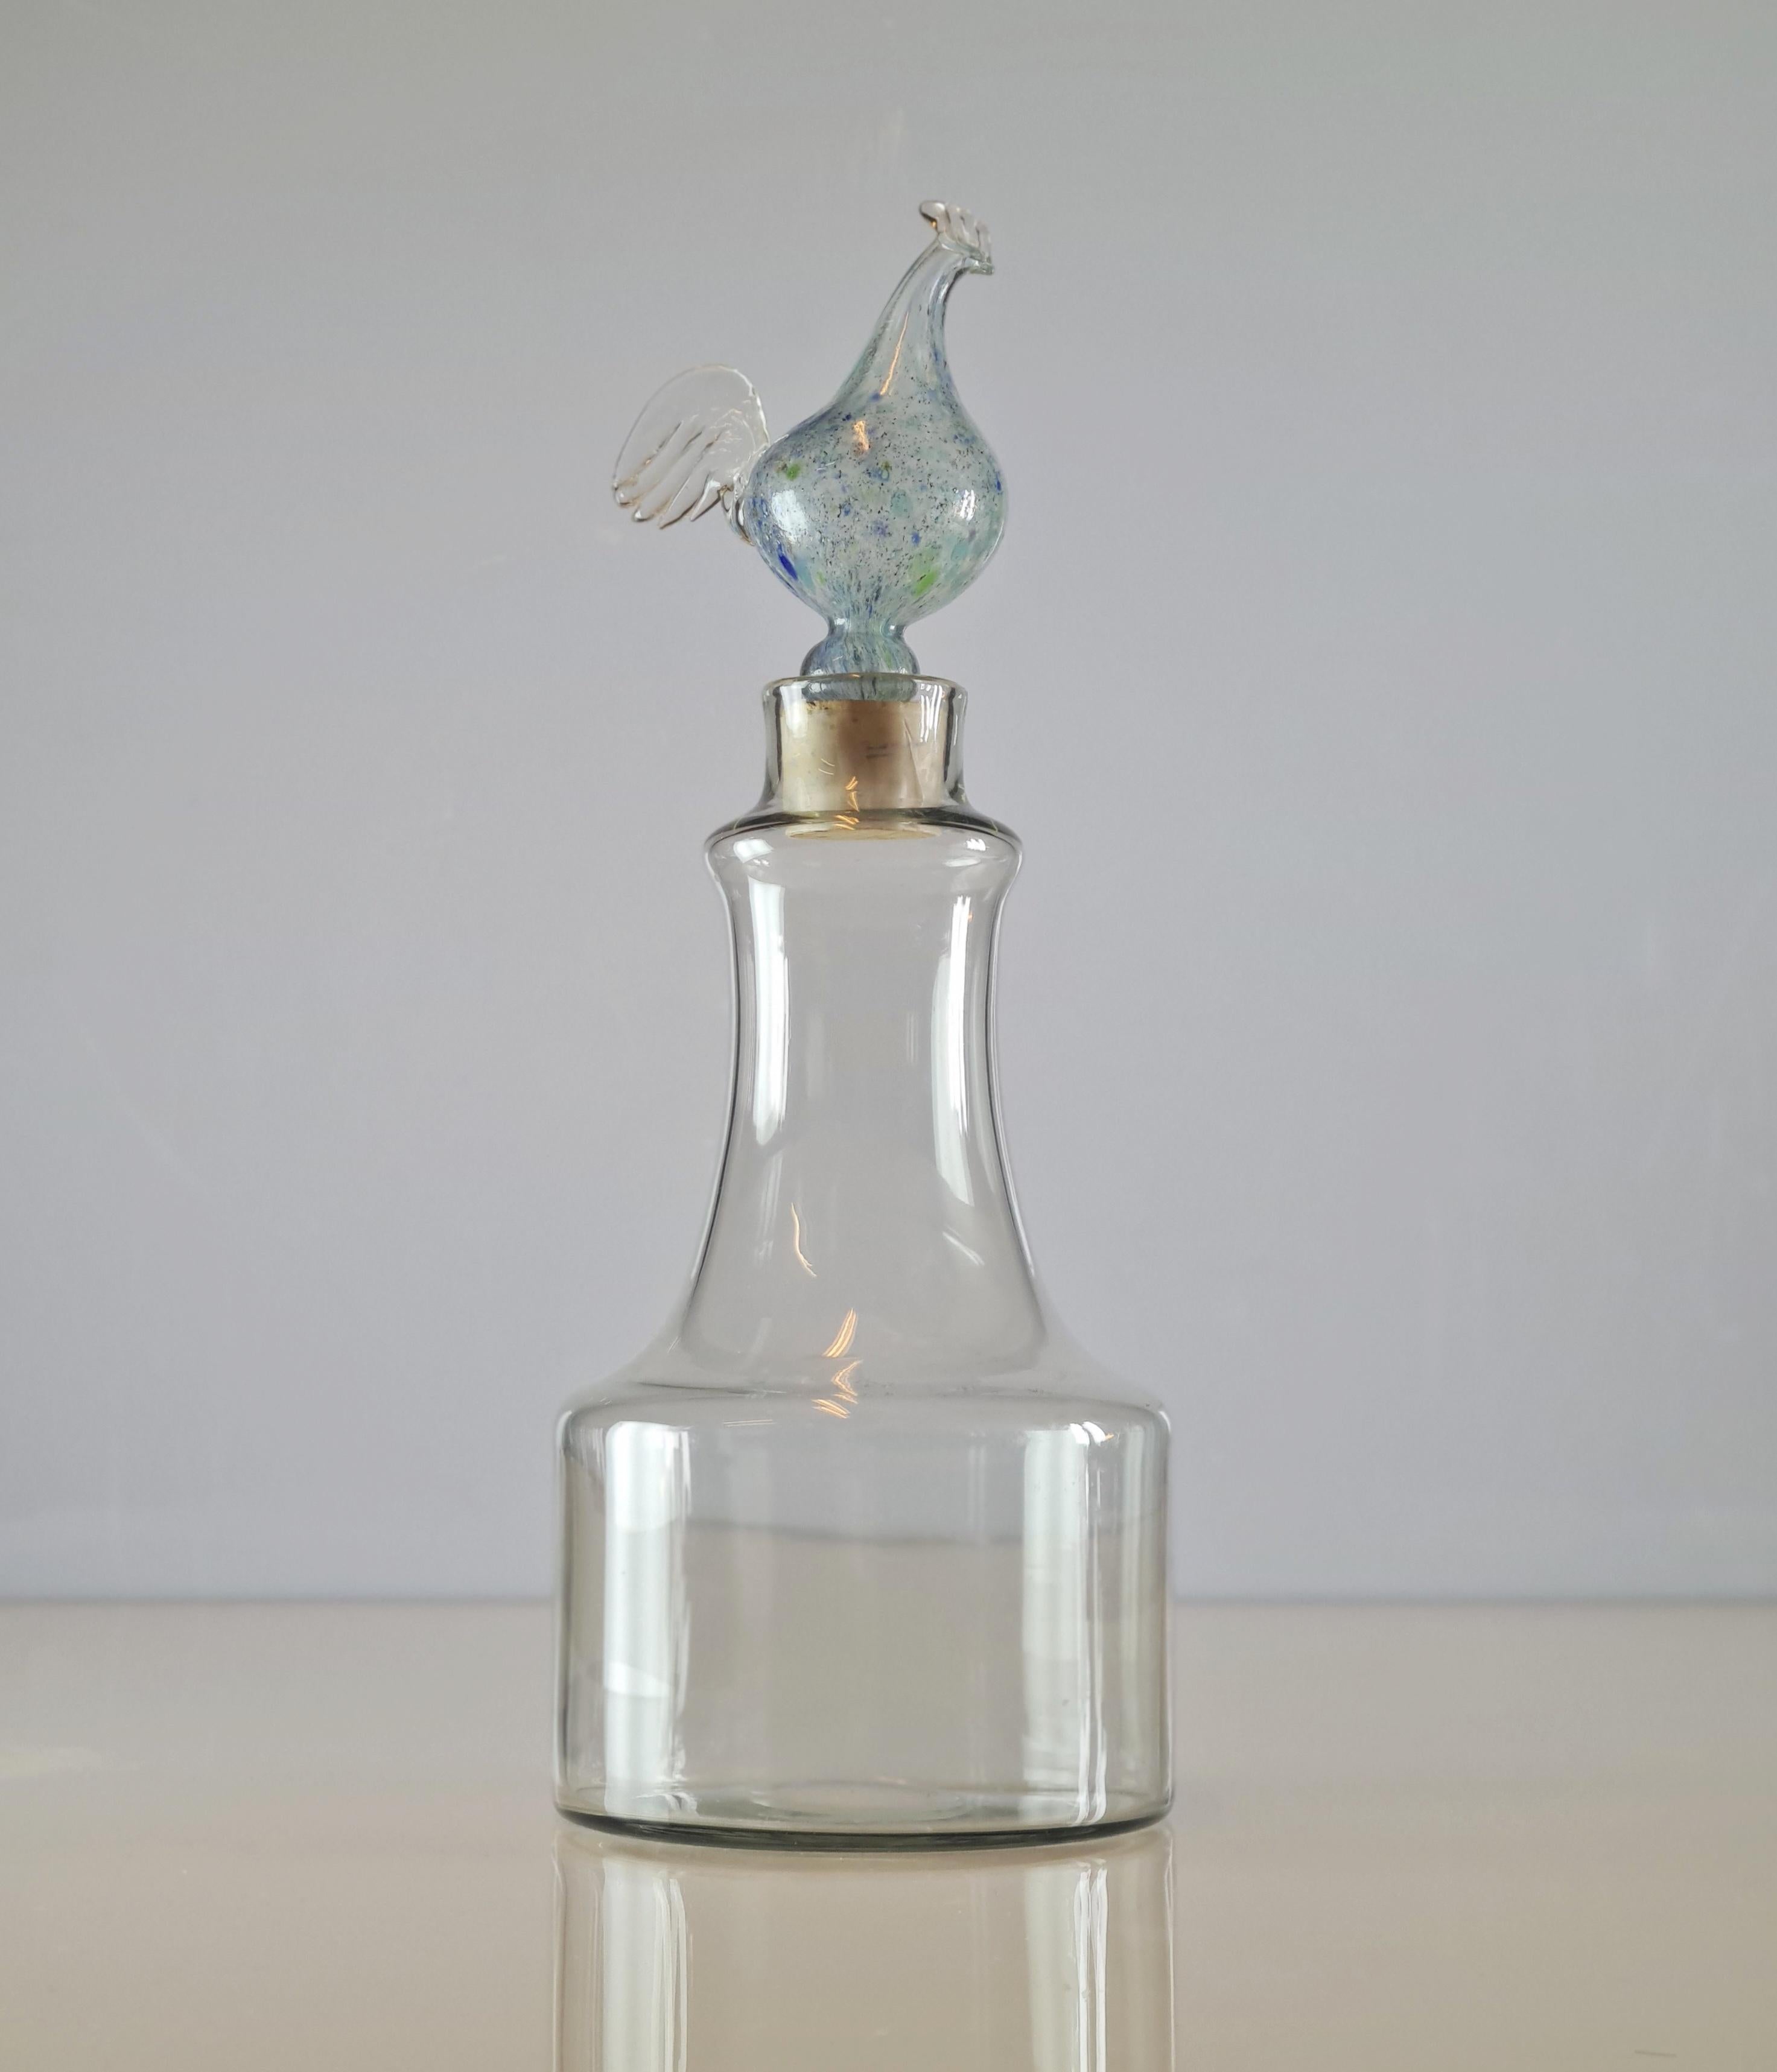 A beautiful mould-blown glass decanter by the renowned designer Kaj Franck. This object has a distinctive cock stopper on the top, but can be used with or without. This particular series of decanters by Kaj Franck was manufactured for a limited time